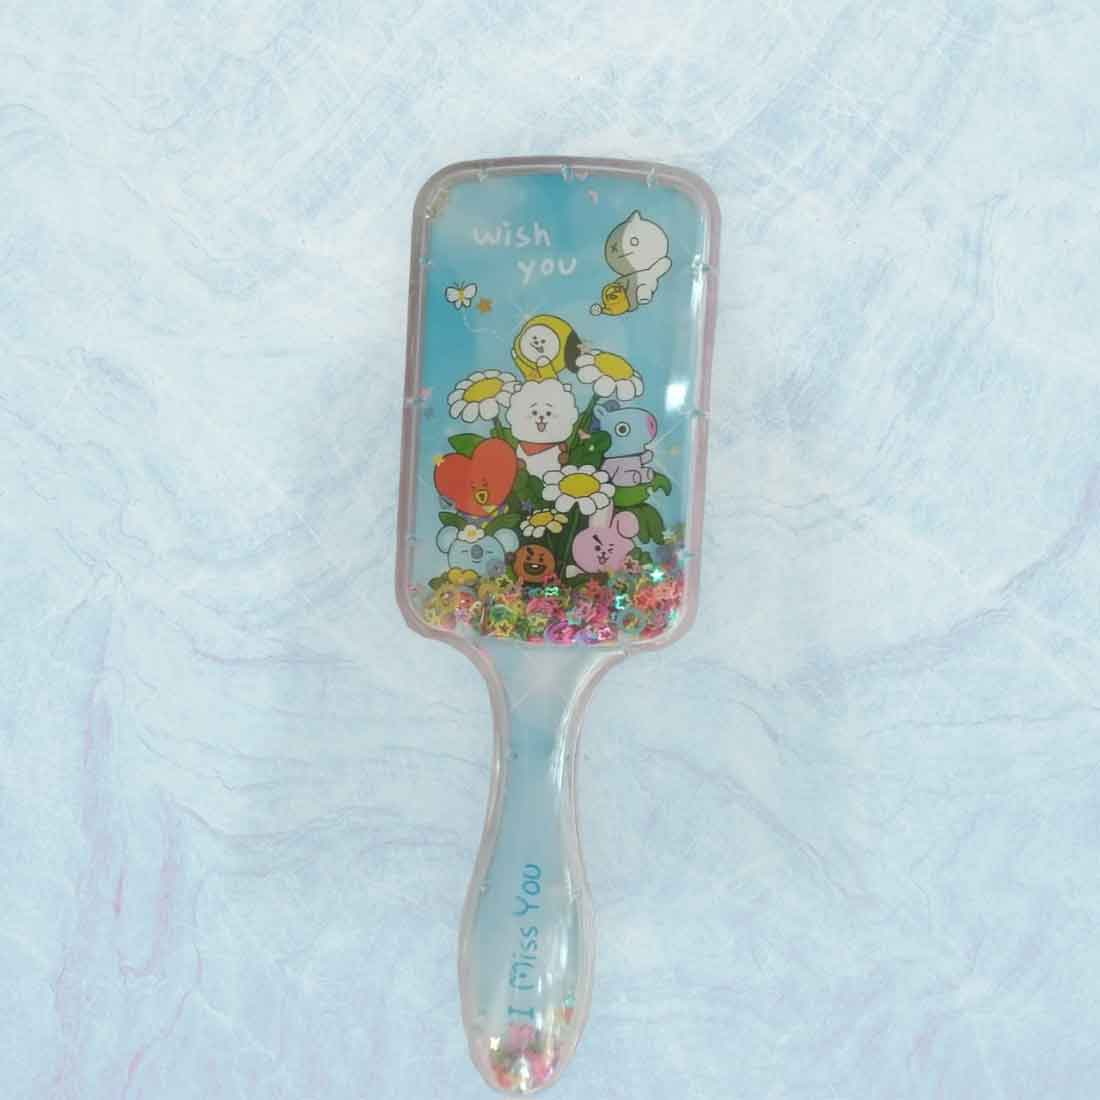 Cute Cartoon Glittery HairBrush – For Kids | Gifts & Return Gifts | Assorted Colors and Design (Pack of 2) - Apkamart